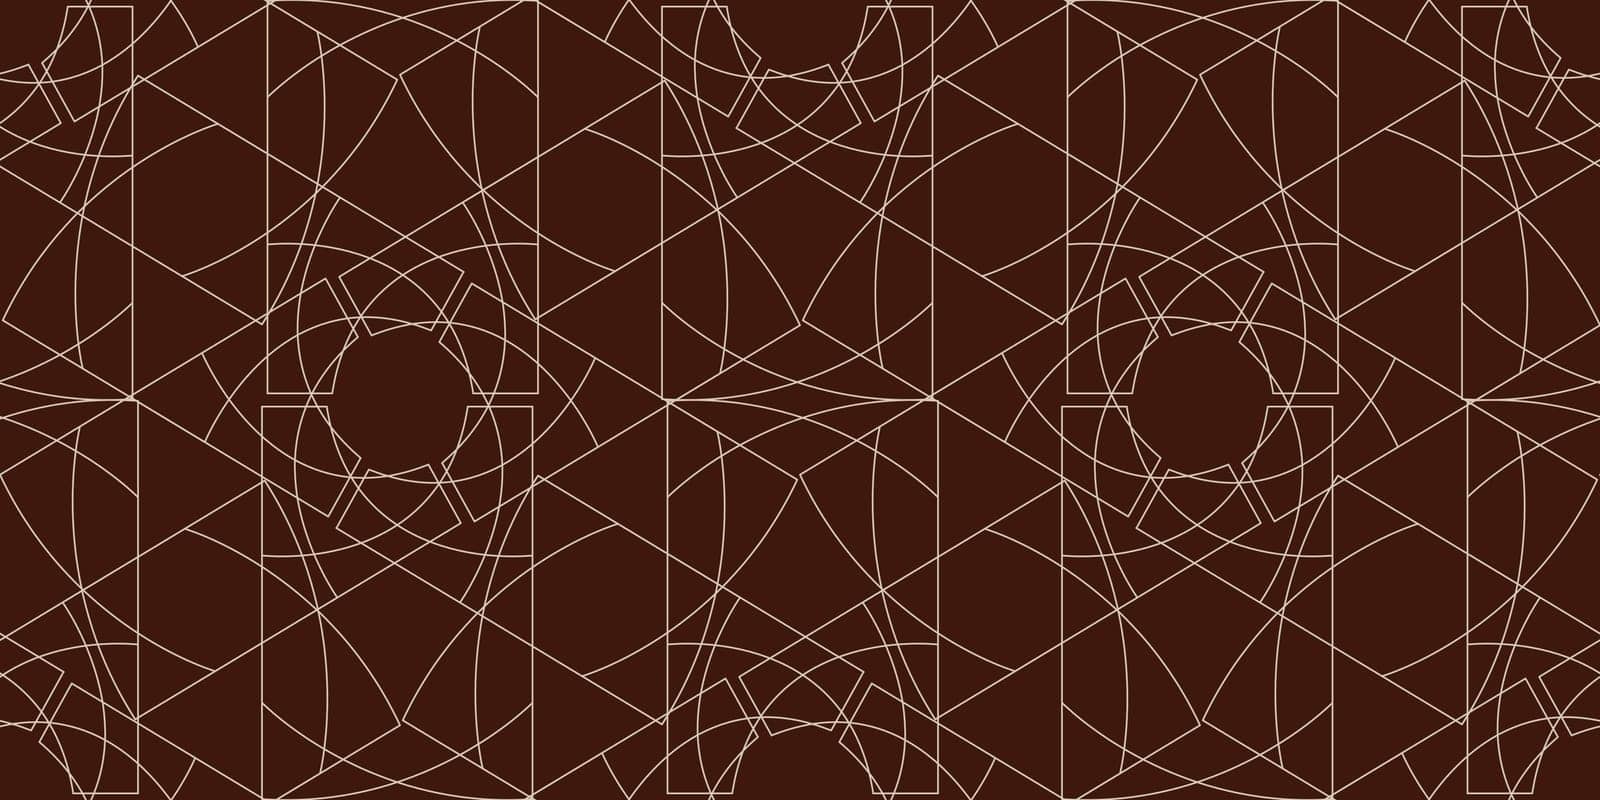 Brown geometric pattern on a background with symmetry and parallel lines. The motif is reminiscent of wood flooring, featuring tints and shades in a stylish font